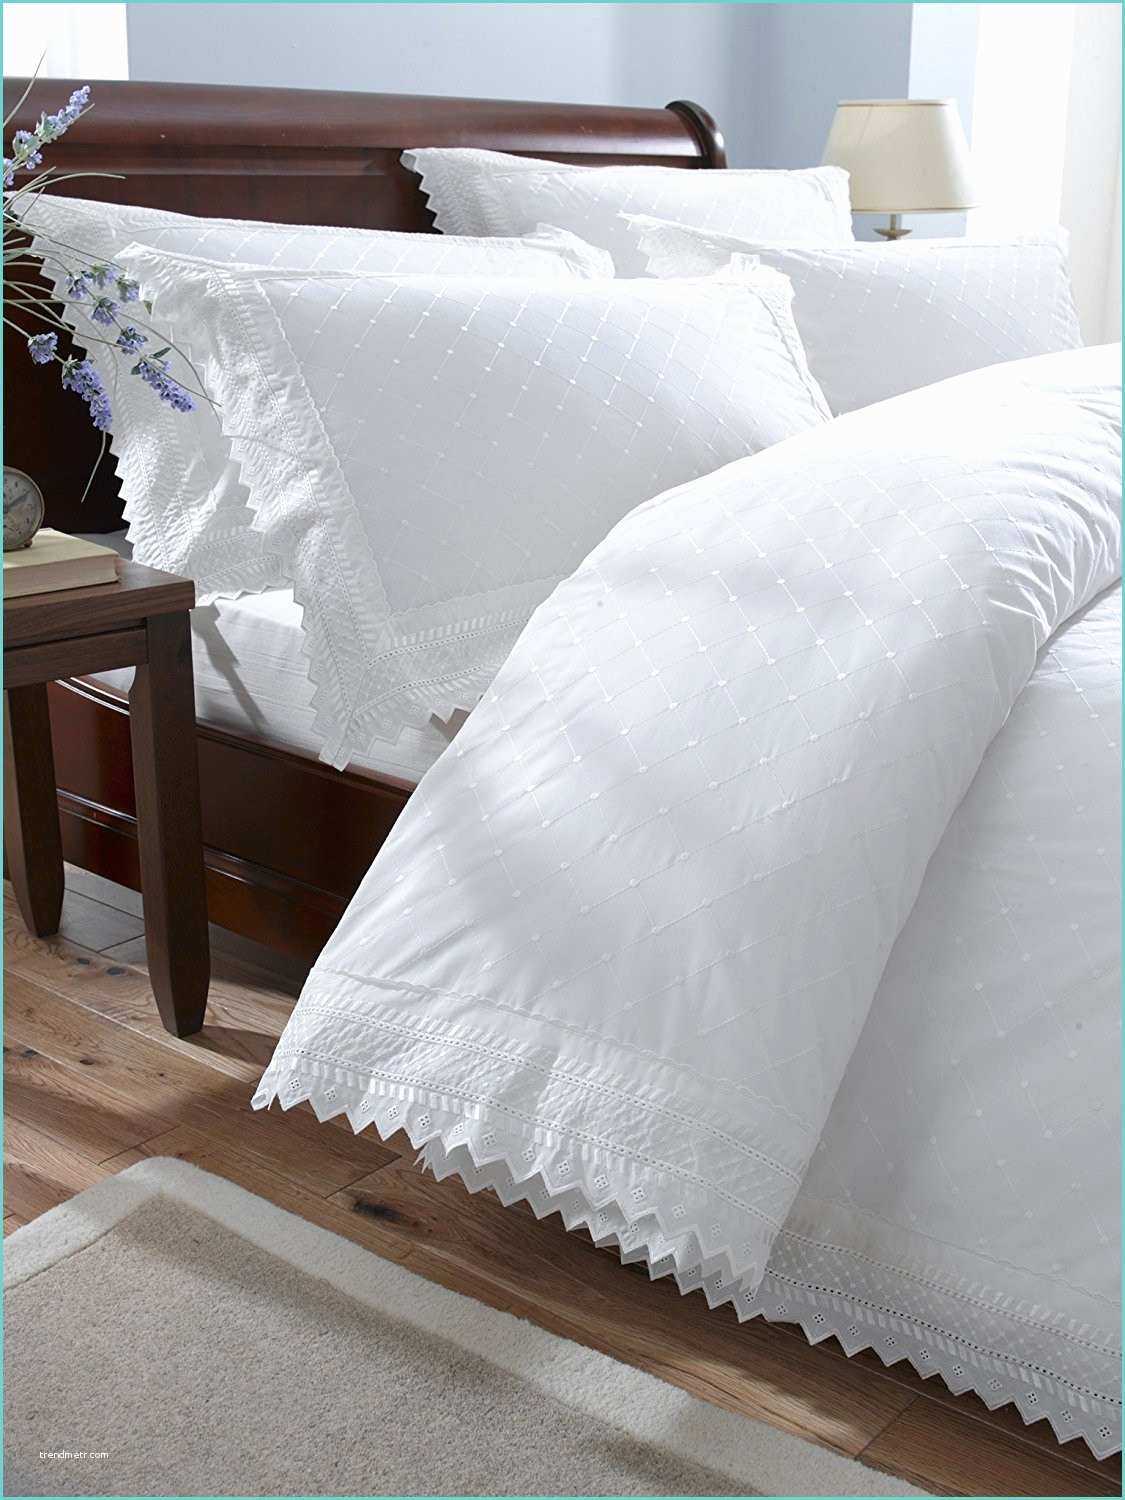 Housse De Couette Blanche Broderie Anglaise Housse De Couette Broderie Anglaise Avec Housse De Couette